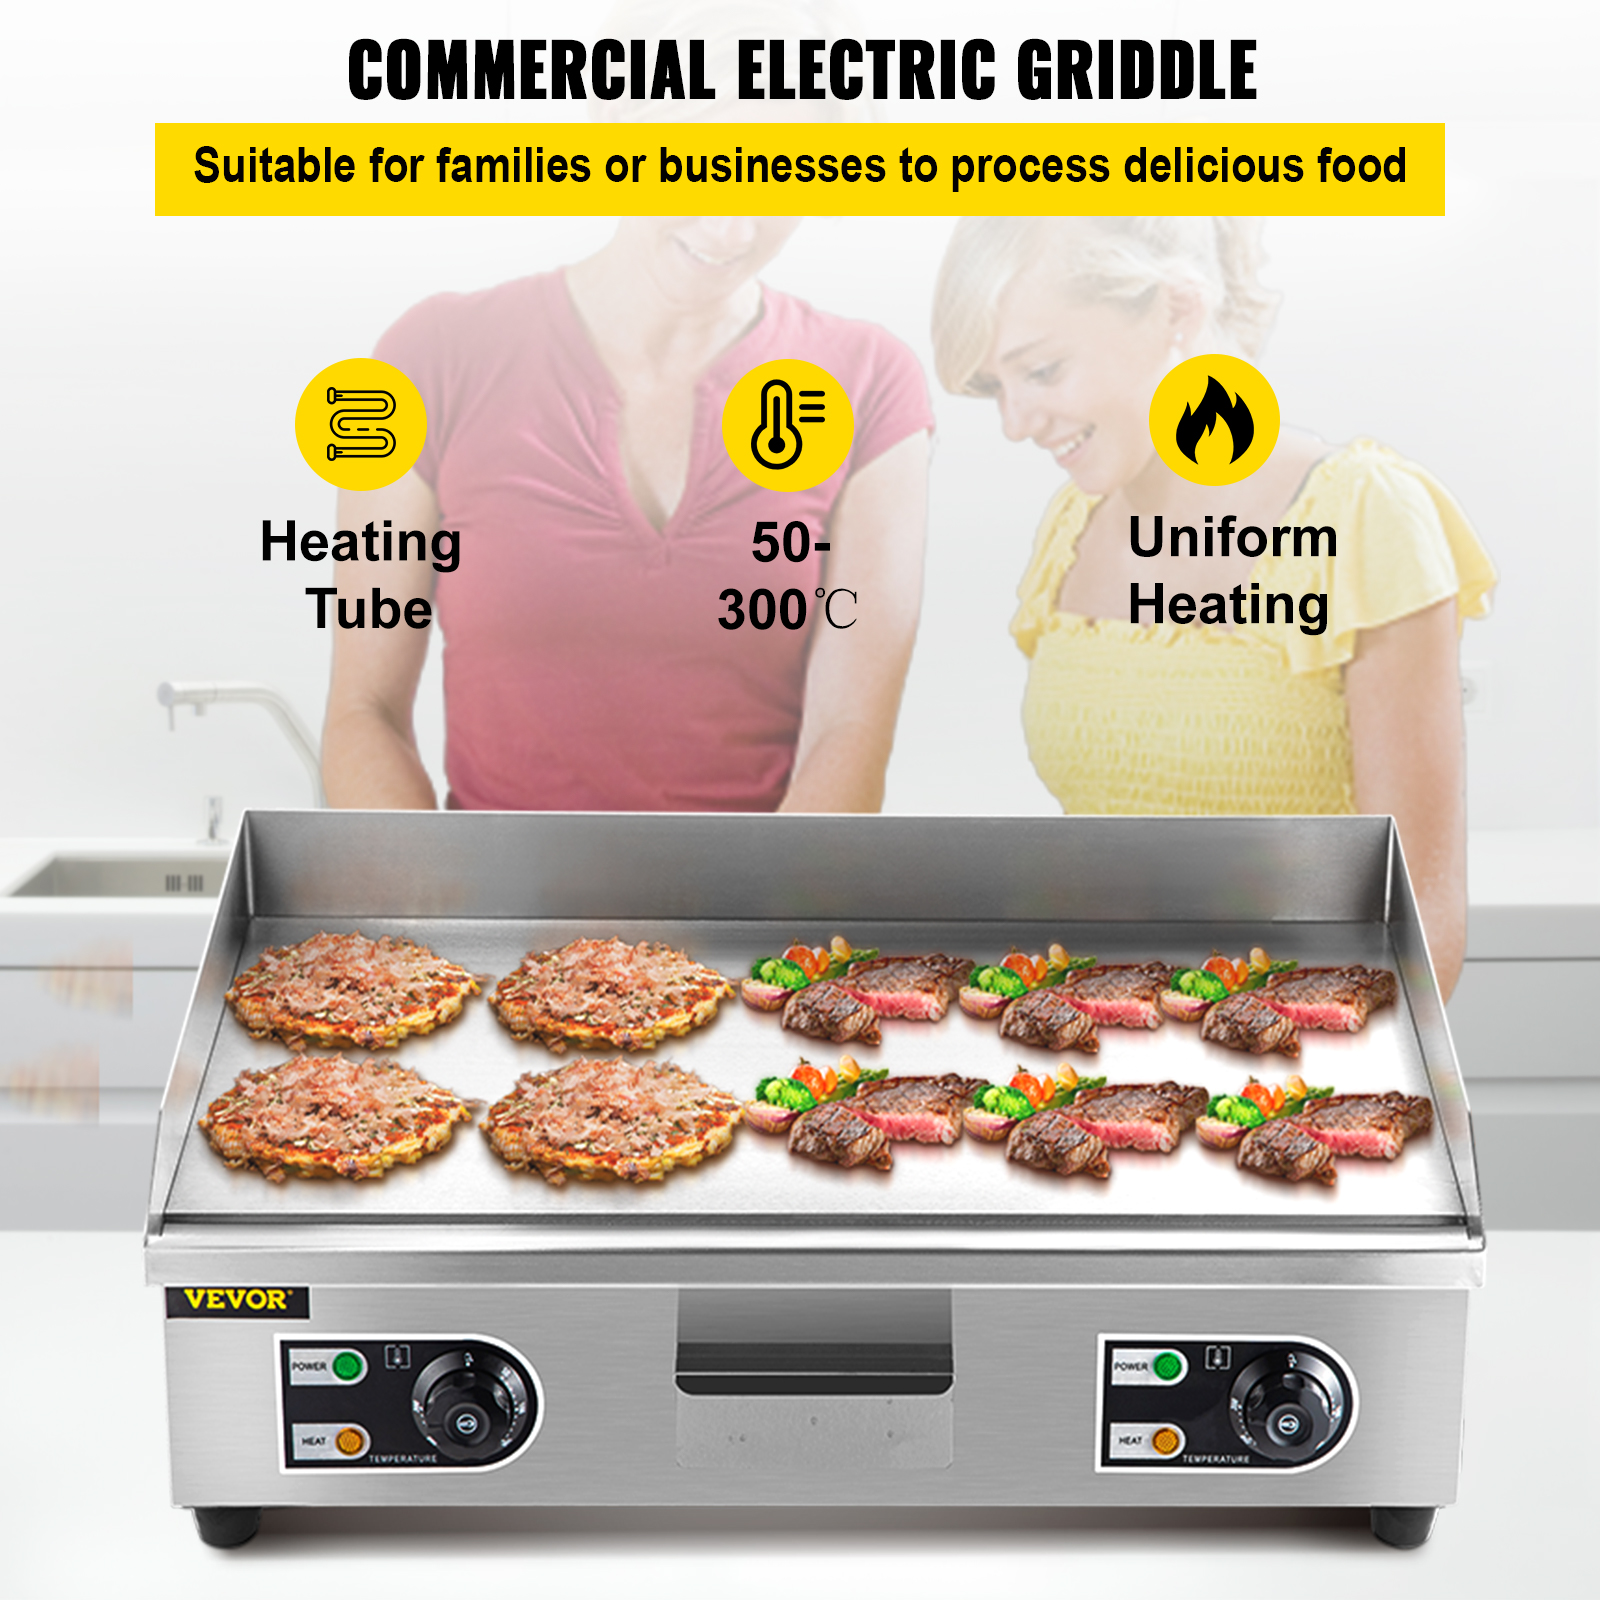 110V 3000W 22" Commercial Electric Countertop Griddle Stainless Steel BBQ Flat Top Grill Hot Plate, Adjustable Thermostatic Control 122°F-572°F, Sta - 3